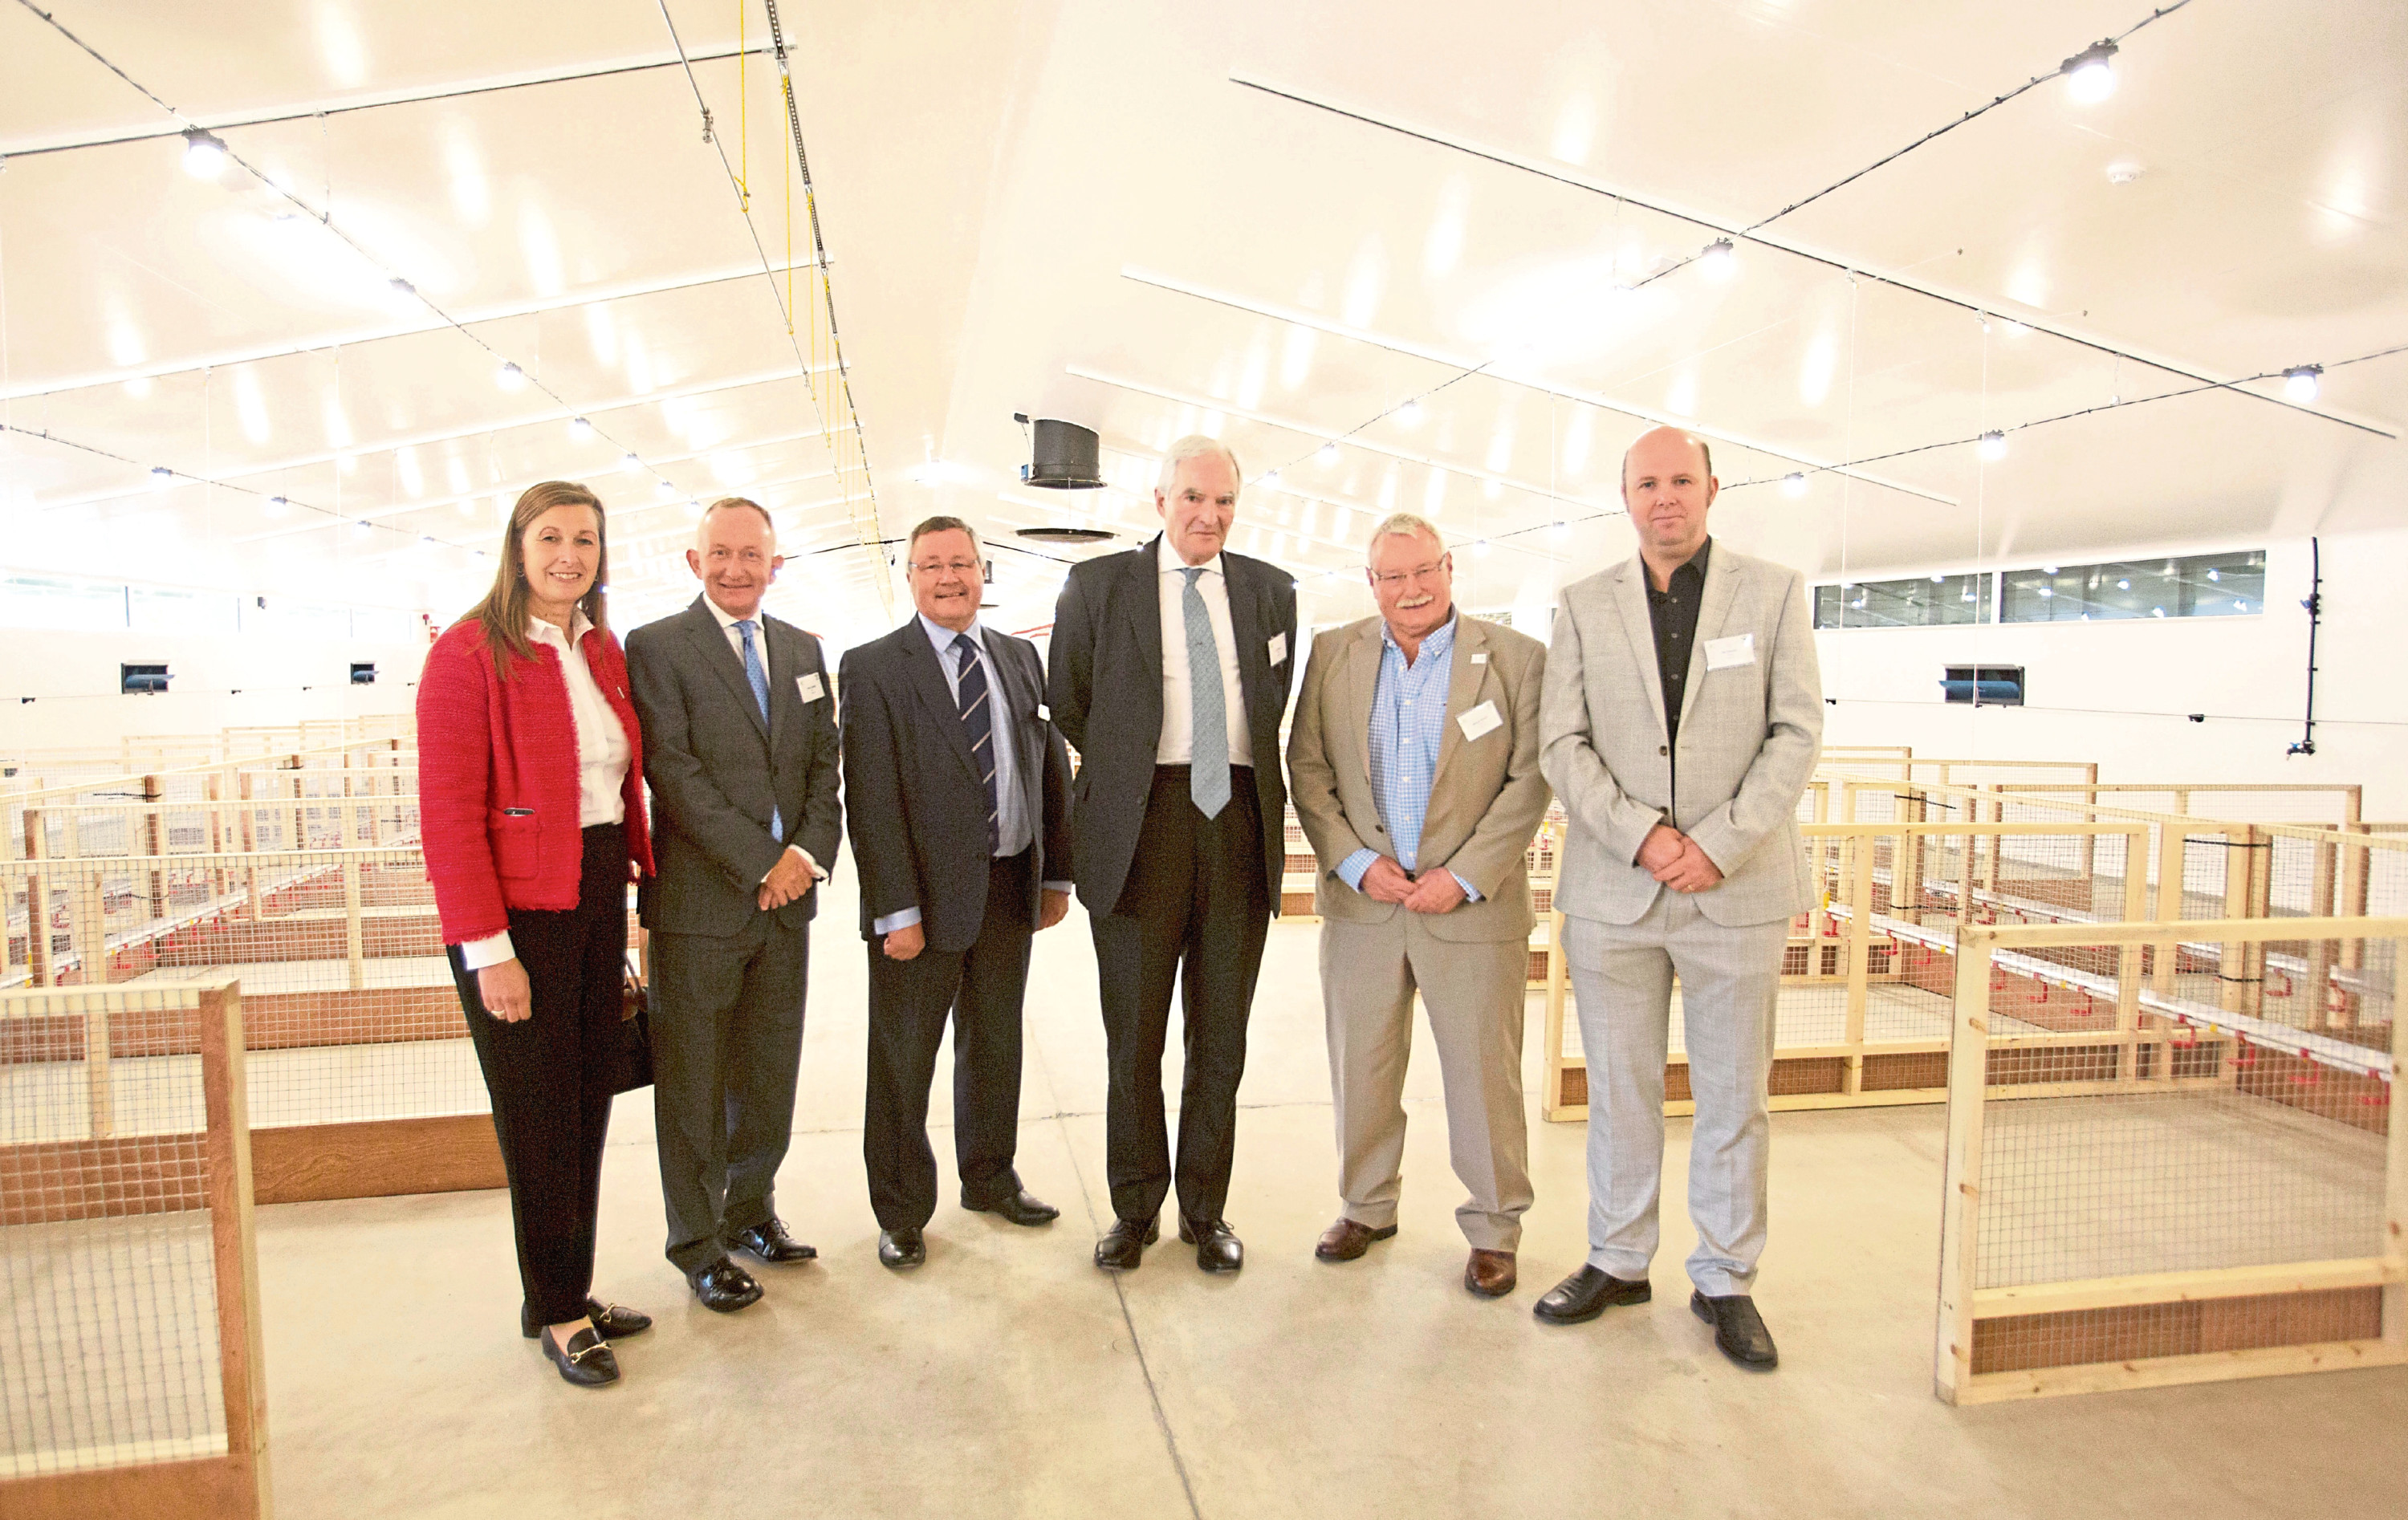 CI EL chief executive Lyndsay Chapman, Mike Cantlay, CI EL chairman Tim Bennett, Lord Henley, Professor Powell, and
Dr Jos Houdijk, SRUC Professor of Animal Nutrition and Health at the opening of Allermuir Avian Innovation and Skills Centre